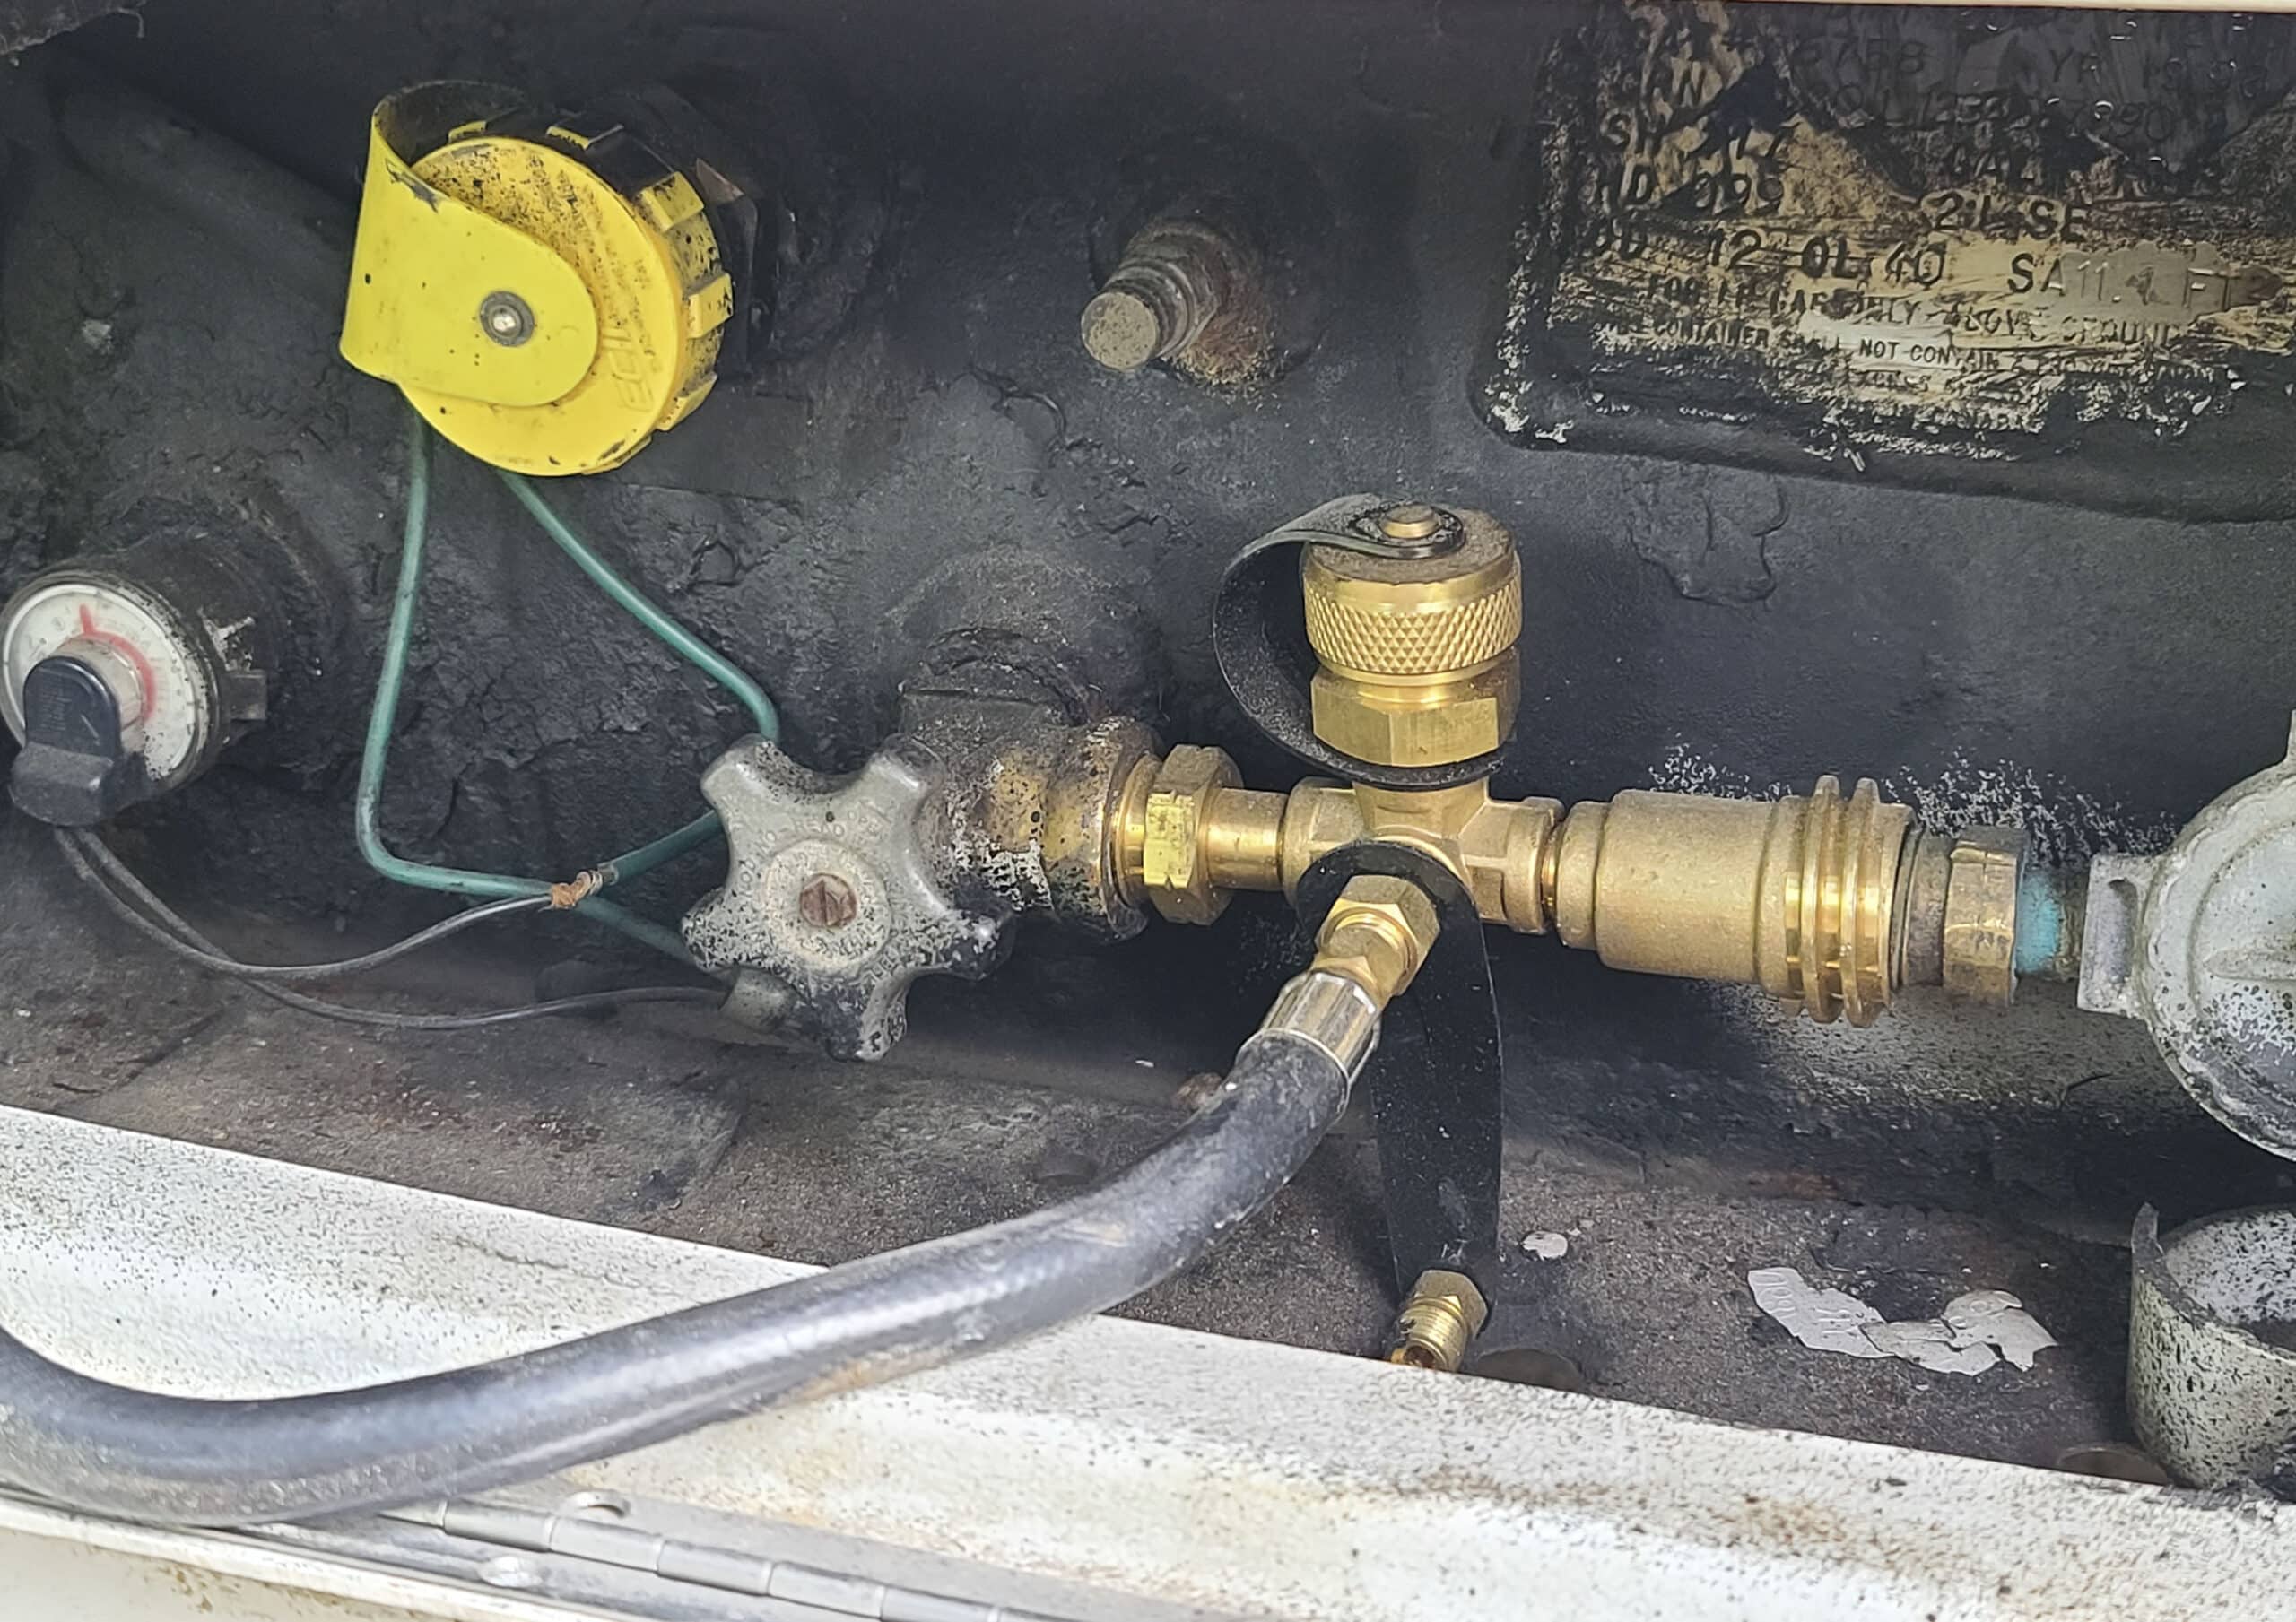 A propane port and valve on a motorhome.  A brass tee has a black rubber hose leading away.